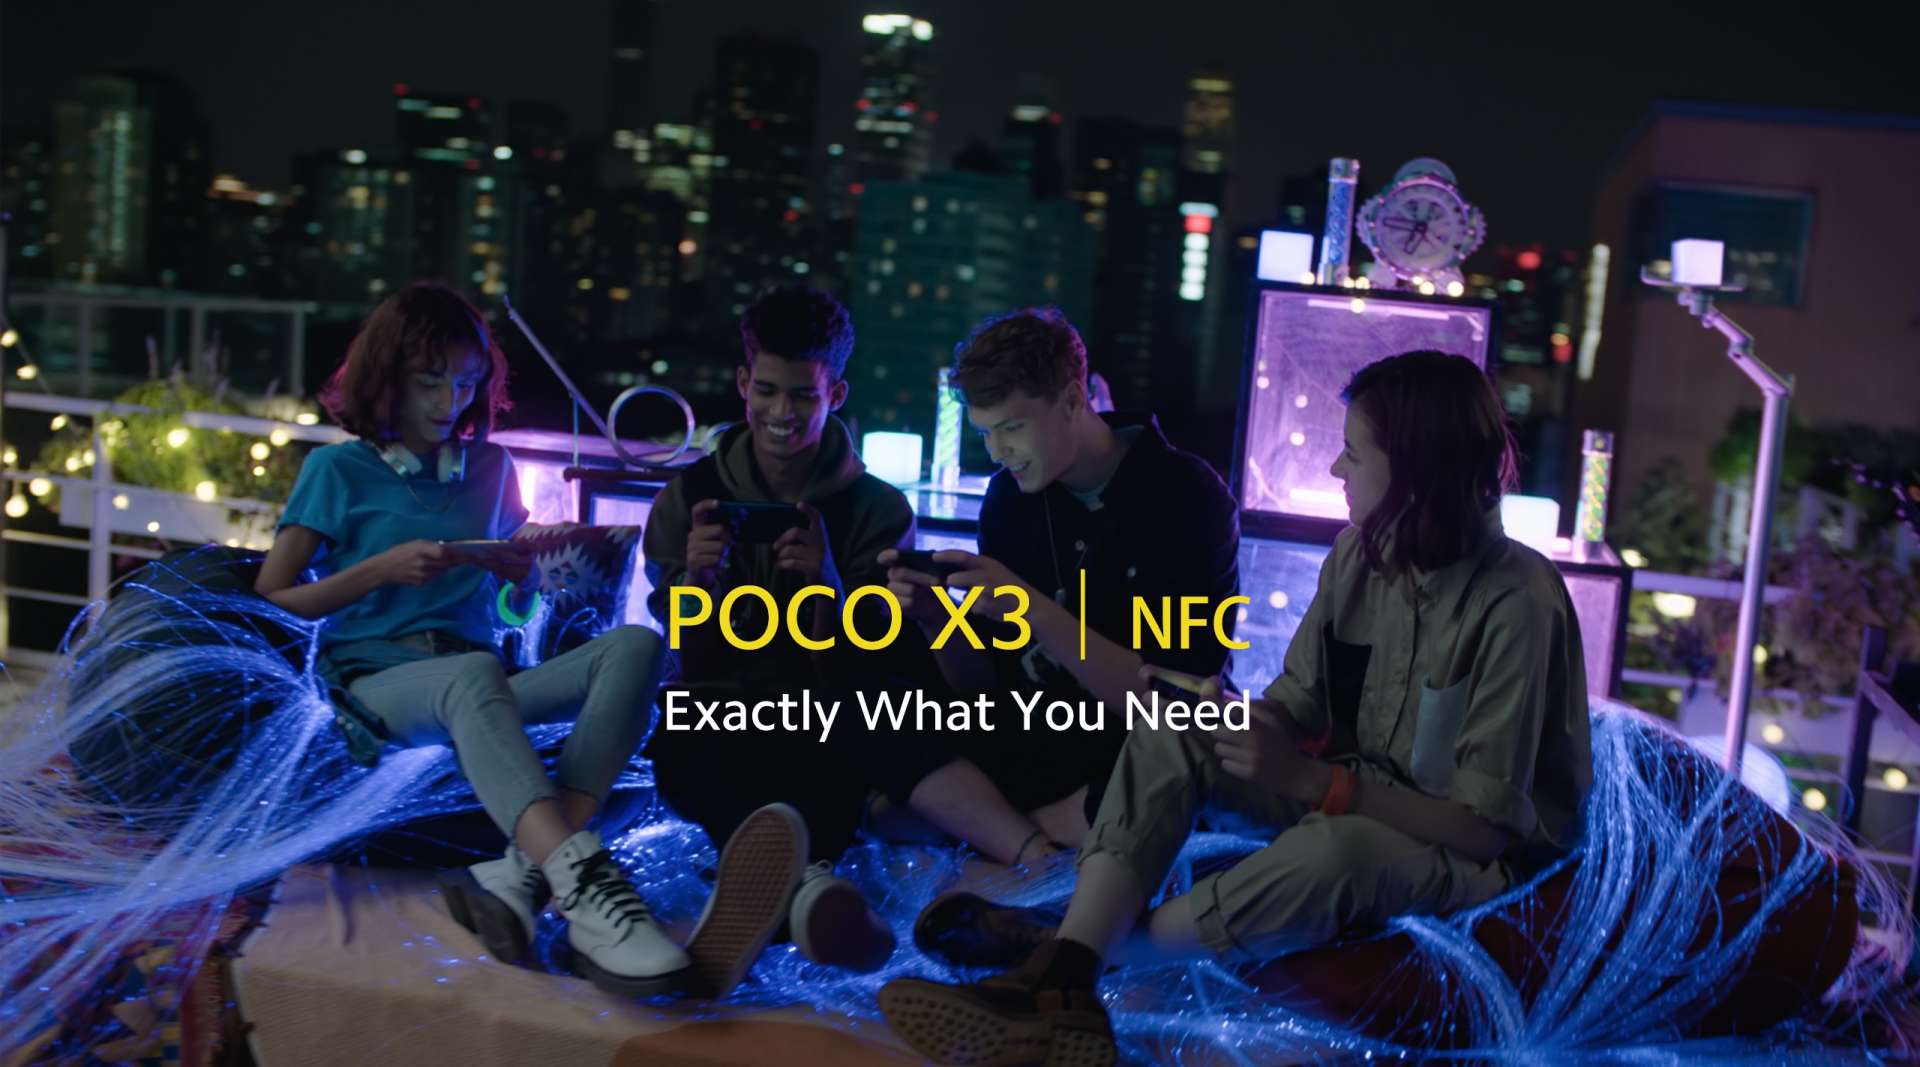 POCO X3 | Exactly What You Need海外版广告